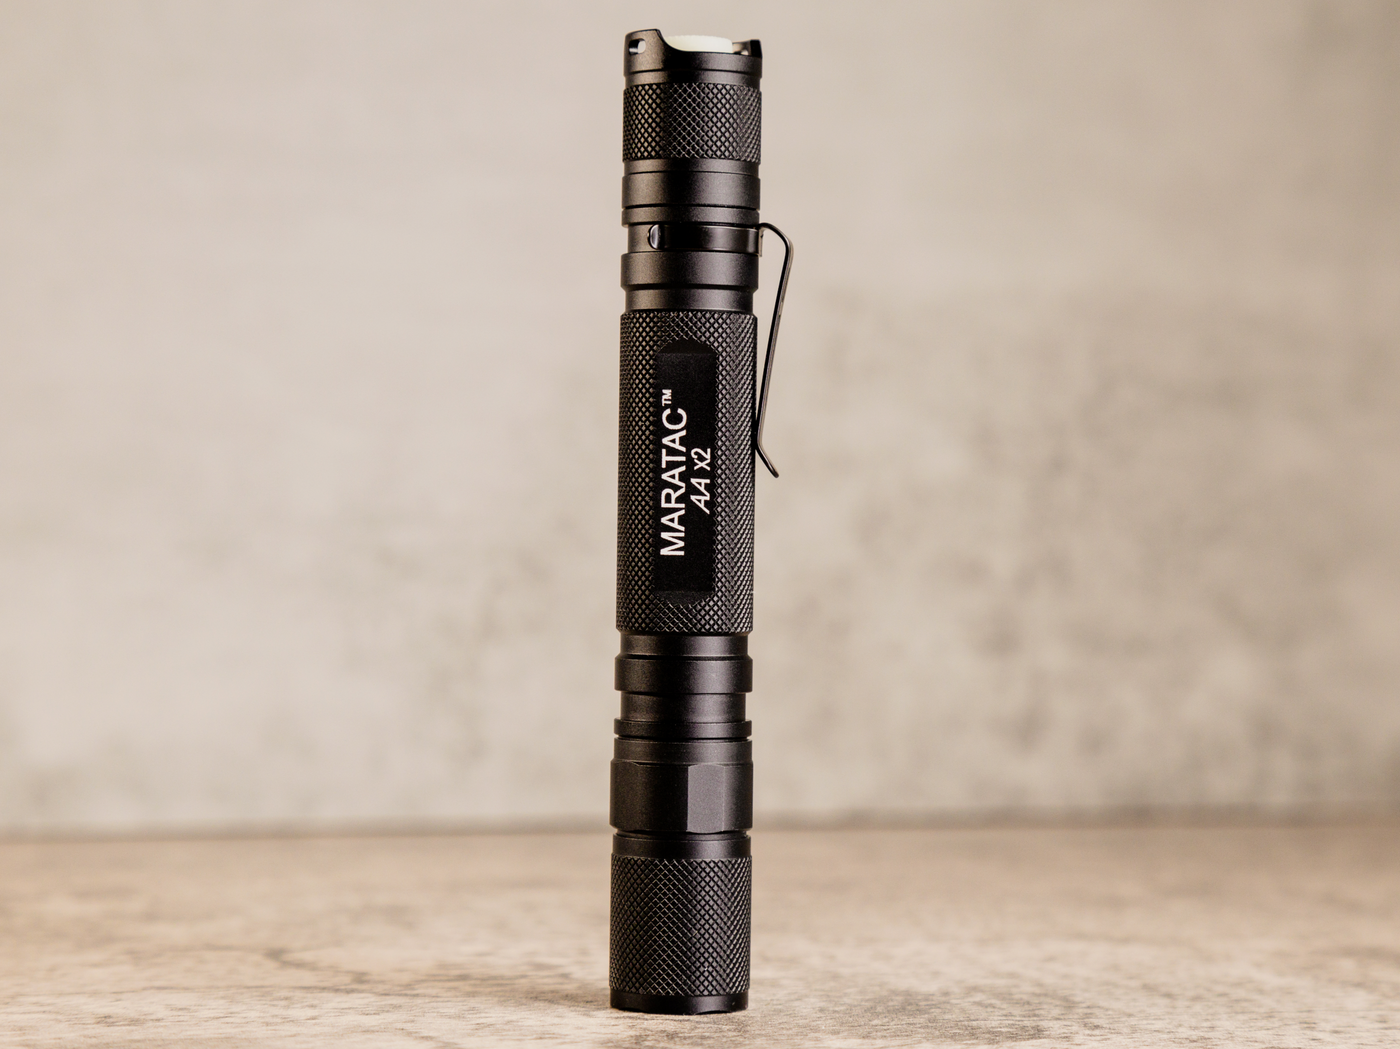 AAx2 Extreme - Glow - Tactical Light by Maratac® REV 5